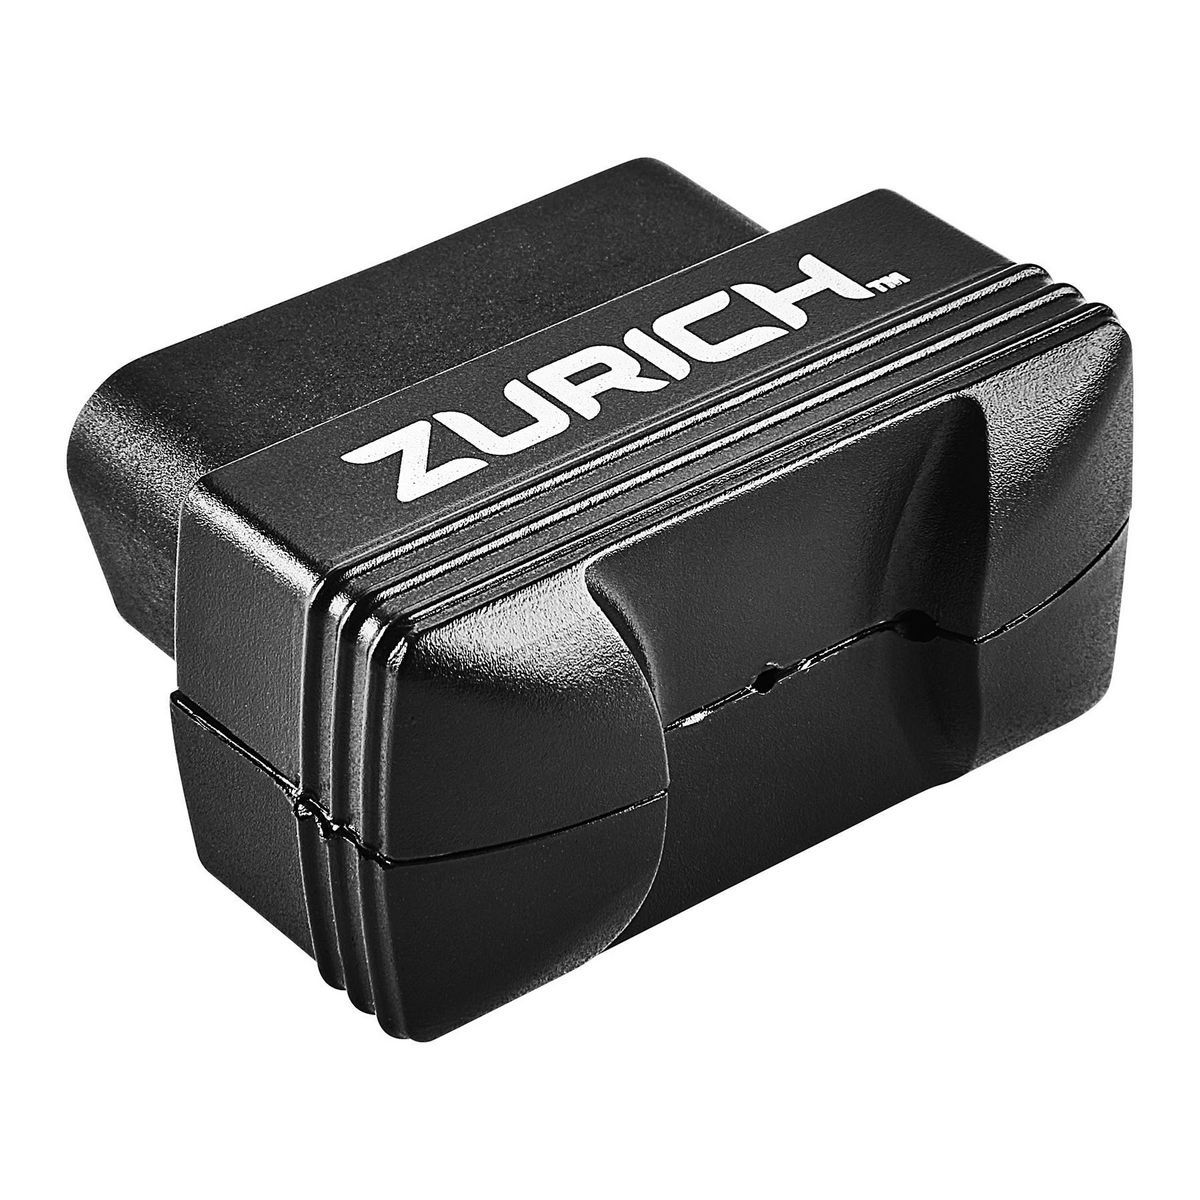 ZURICH ZRBT1 OBD2 BLUETOOTH Code Reader for $44.99 – Harbor Freight Coupons